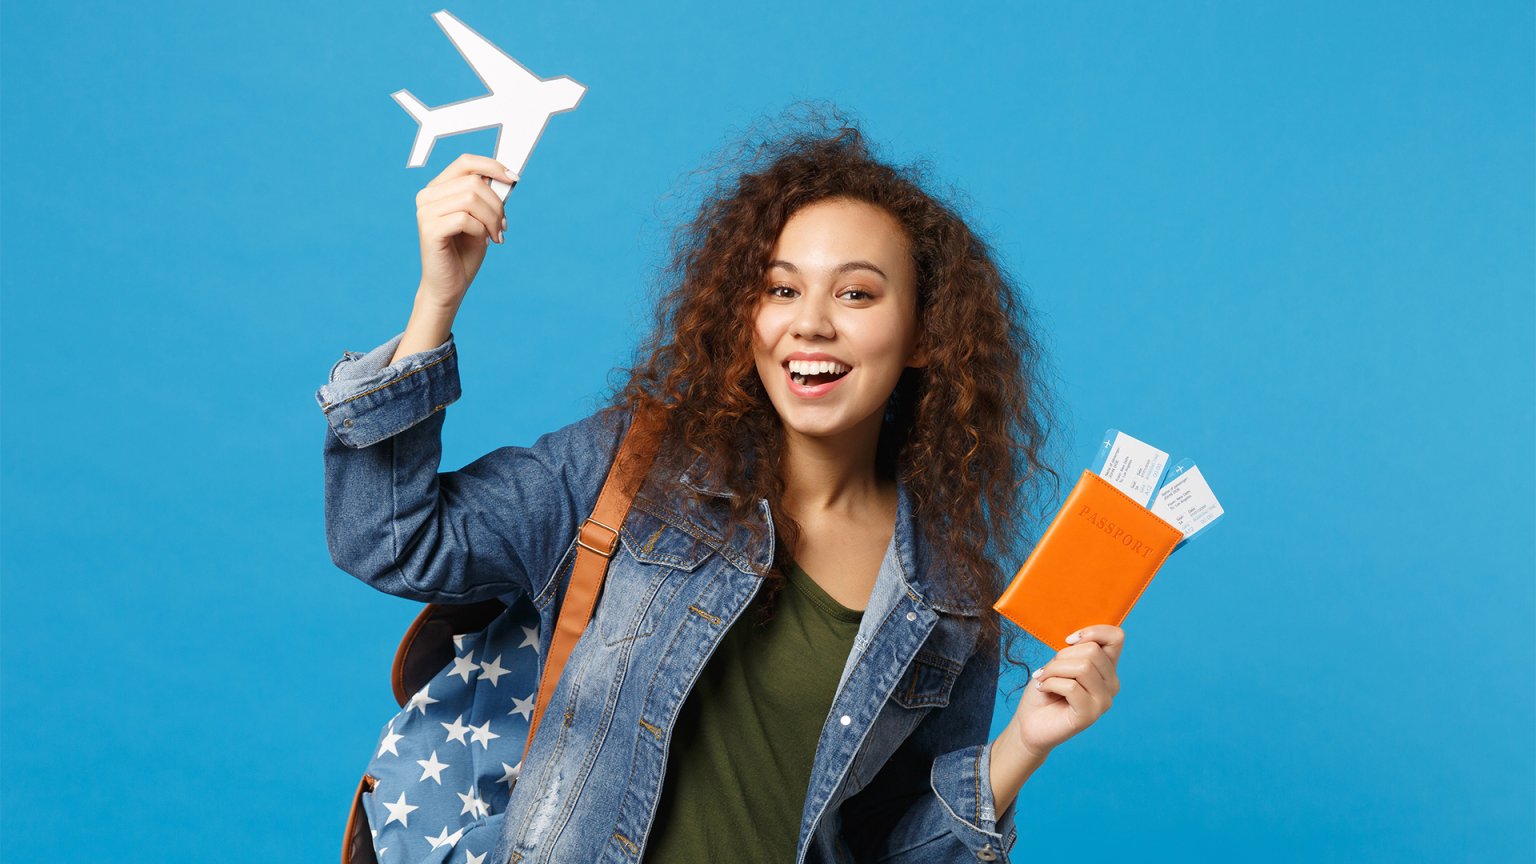 student travel product for international students